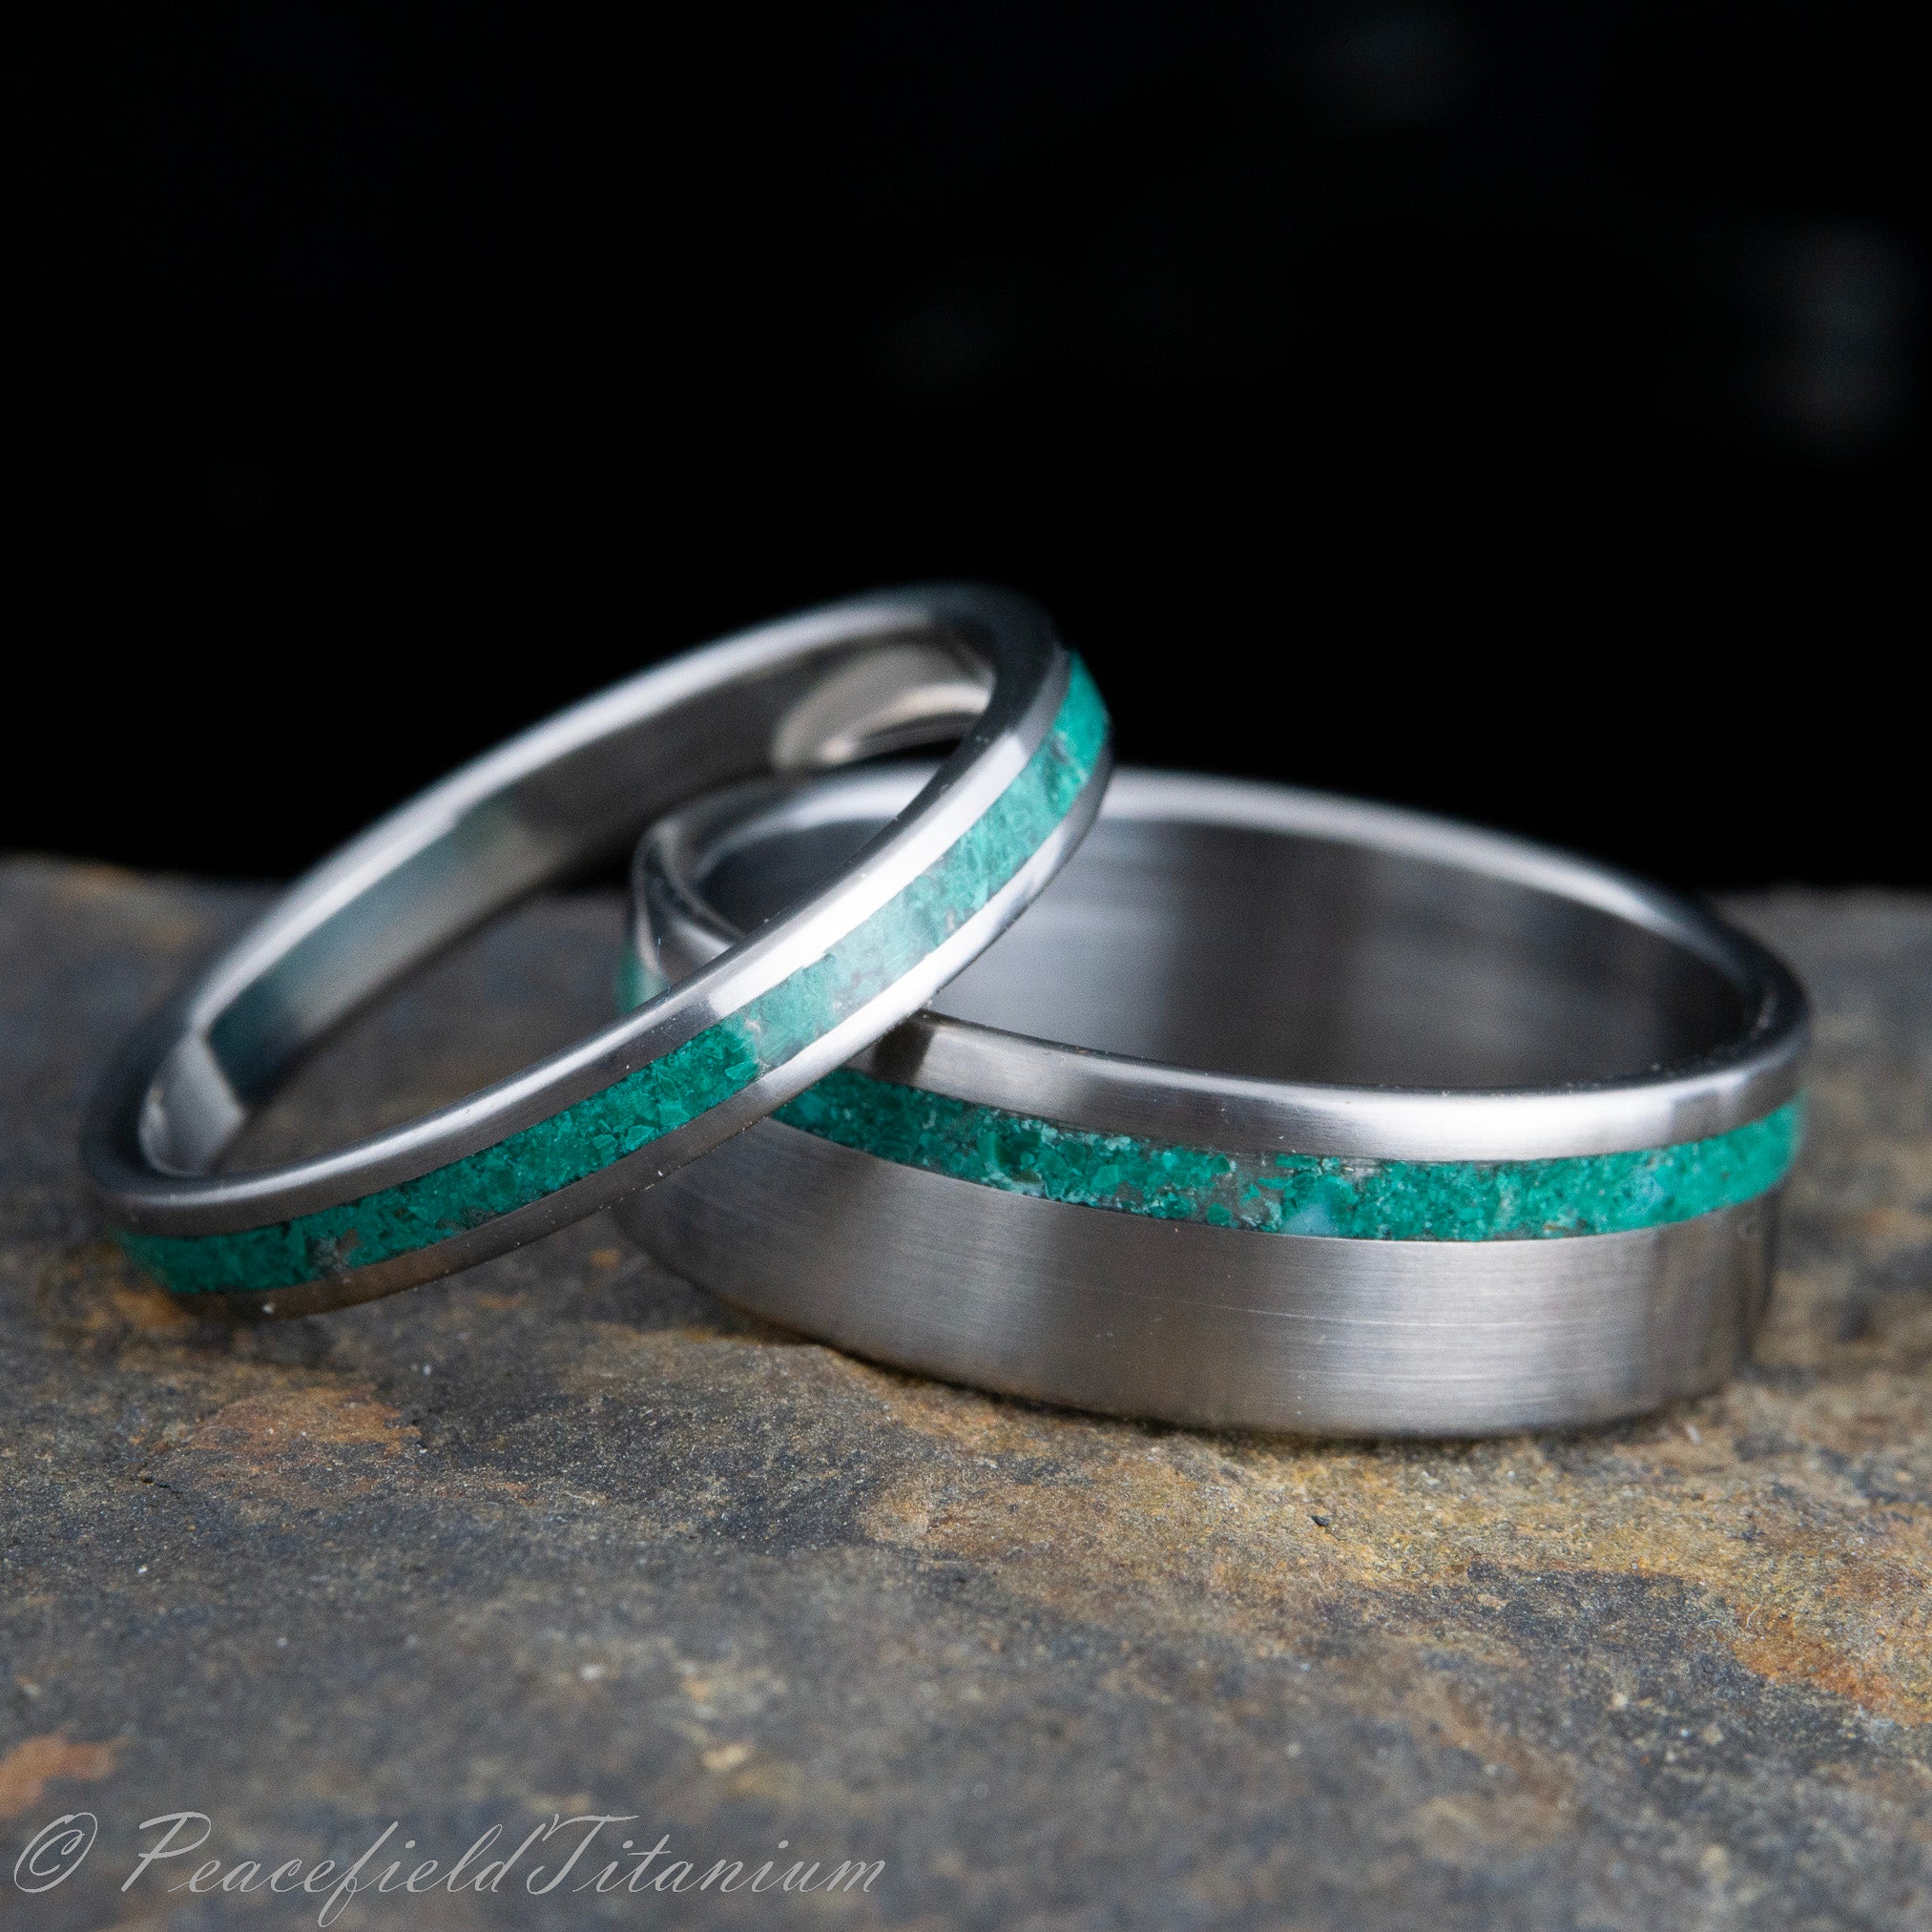 His and hers titanium wedding band set with Malachite stone inlay, real malachite handcrafted inlay wedding rings